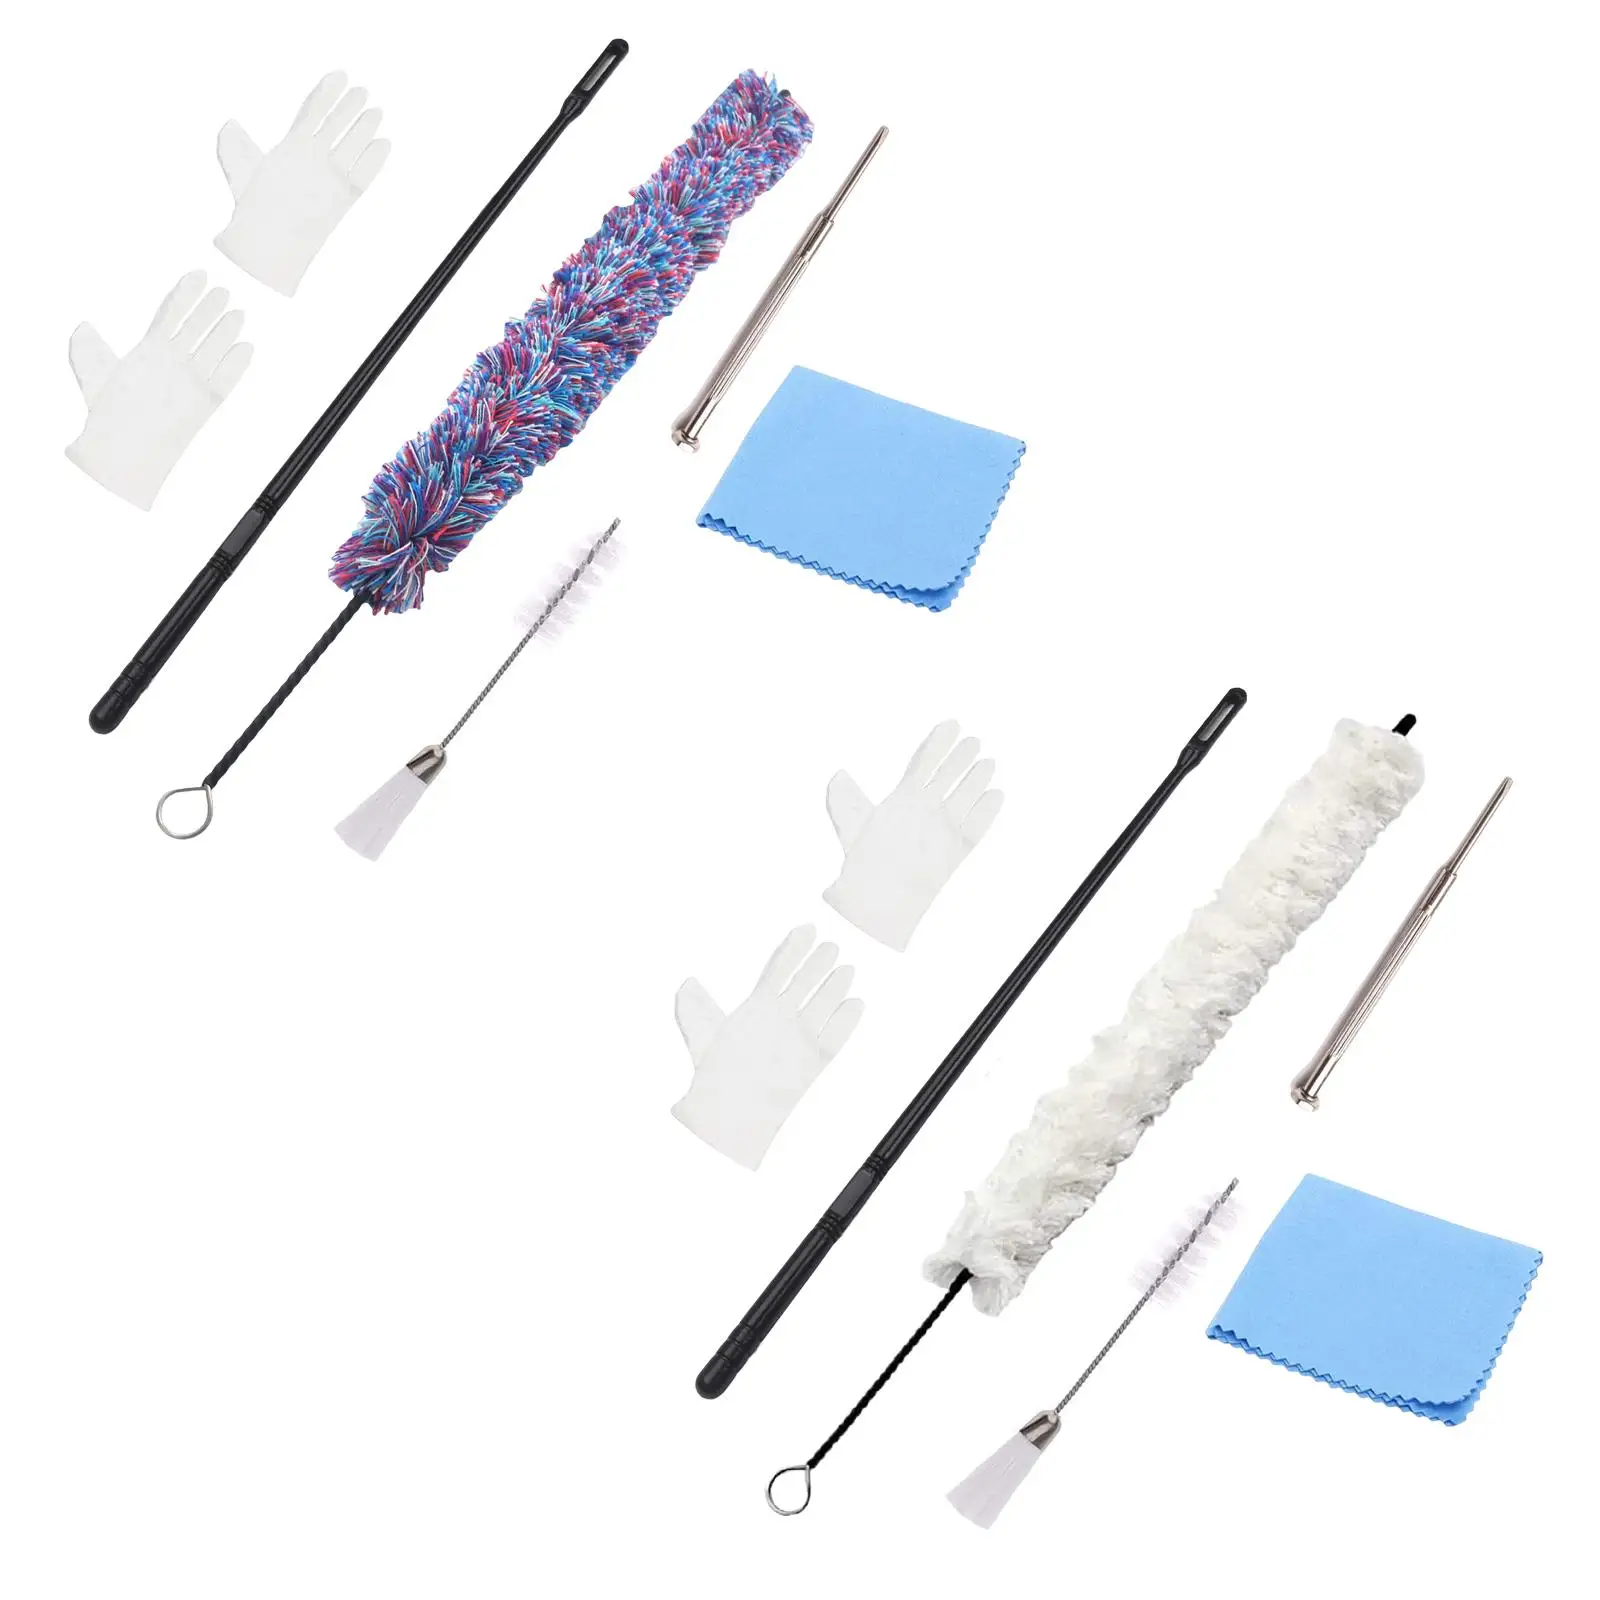 5 PCS Professional Flute Cleaning Kit Set Cleaning Cloth for Flute